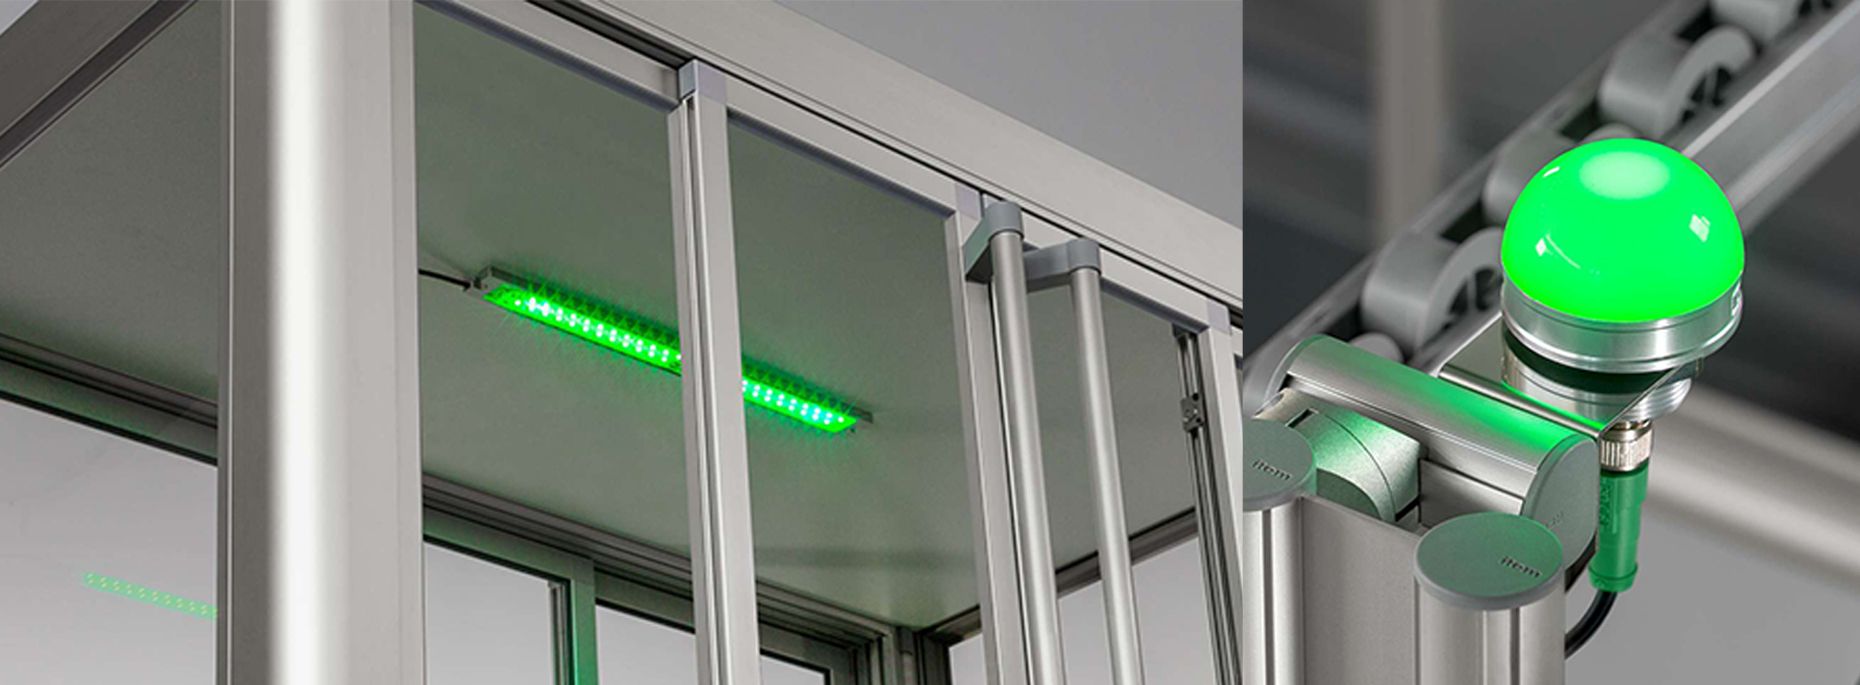 item Signalling Solutions - IO-Link LED strip and signal lights